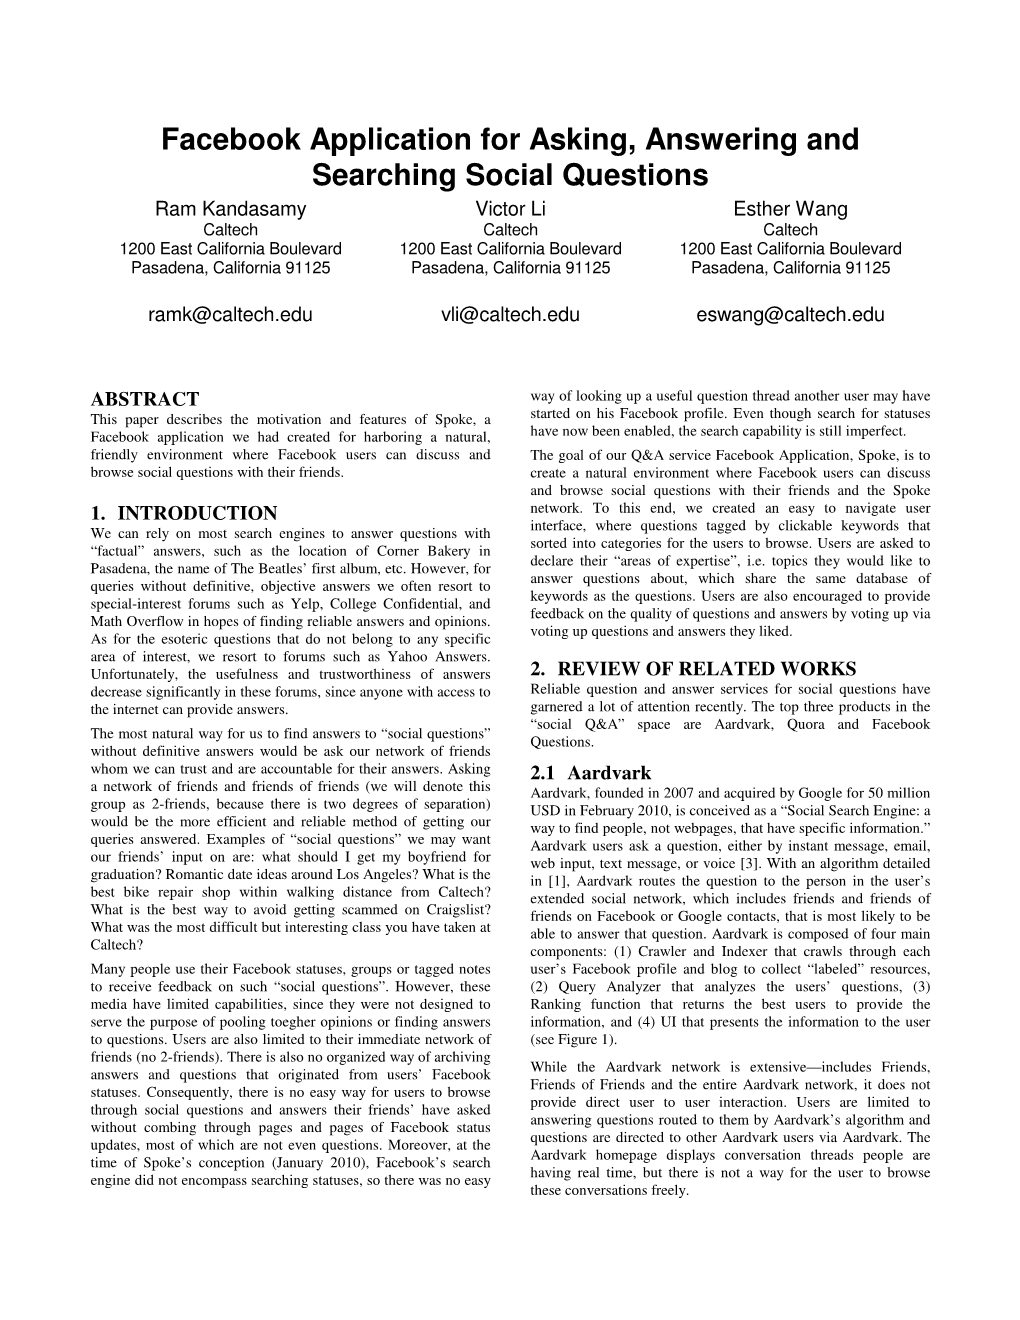 Facebook Application for Asking, Answering and Searching Social